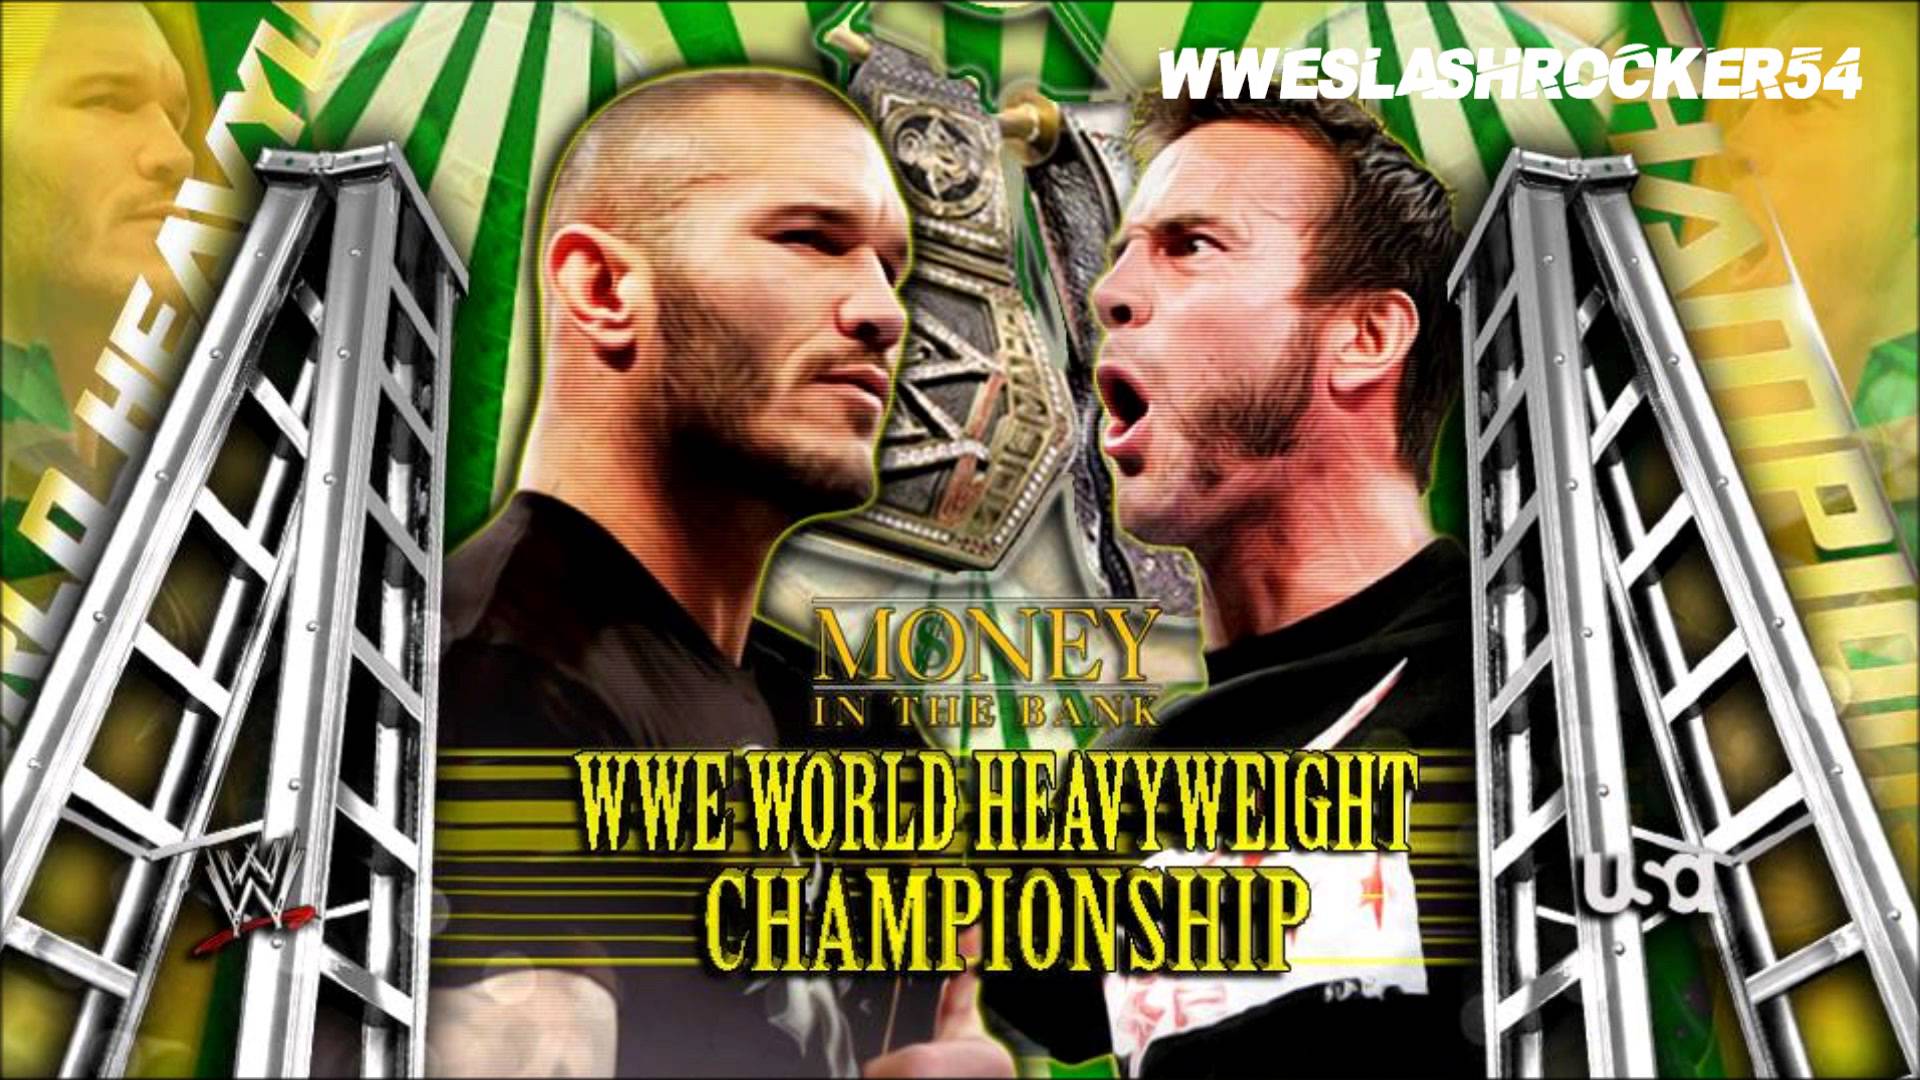 WWE Money in the Bank 2014- Randy Orton vs CM Punk For the WWE World